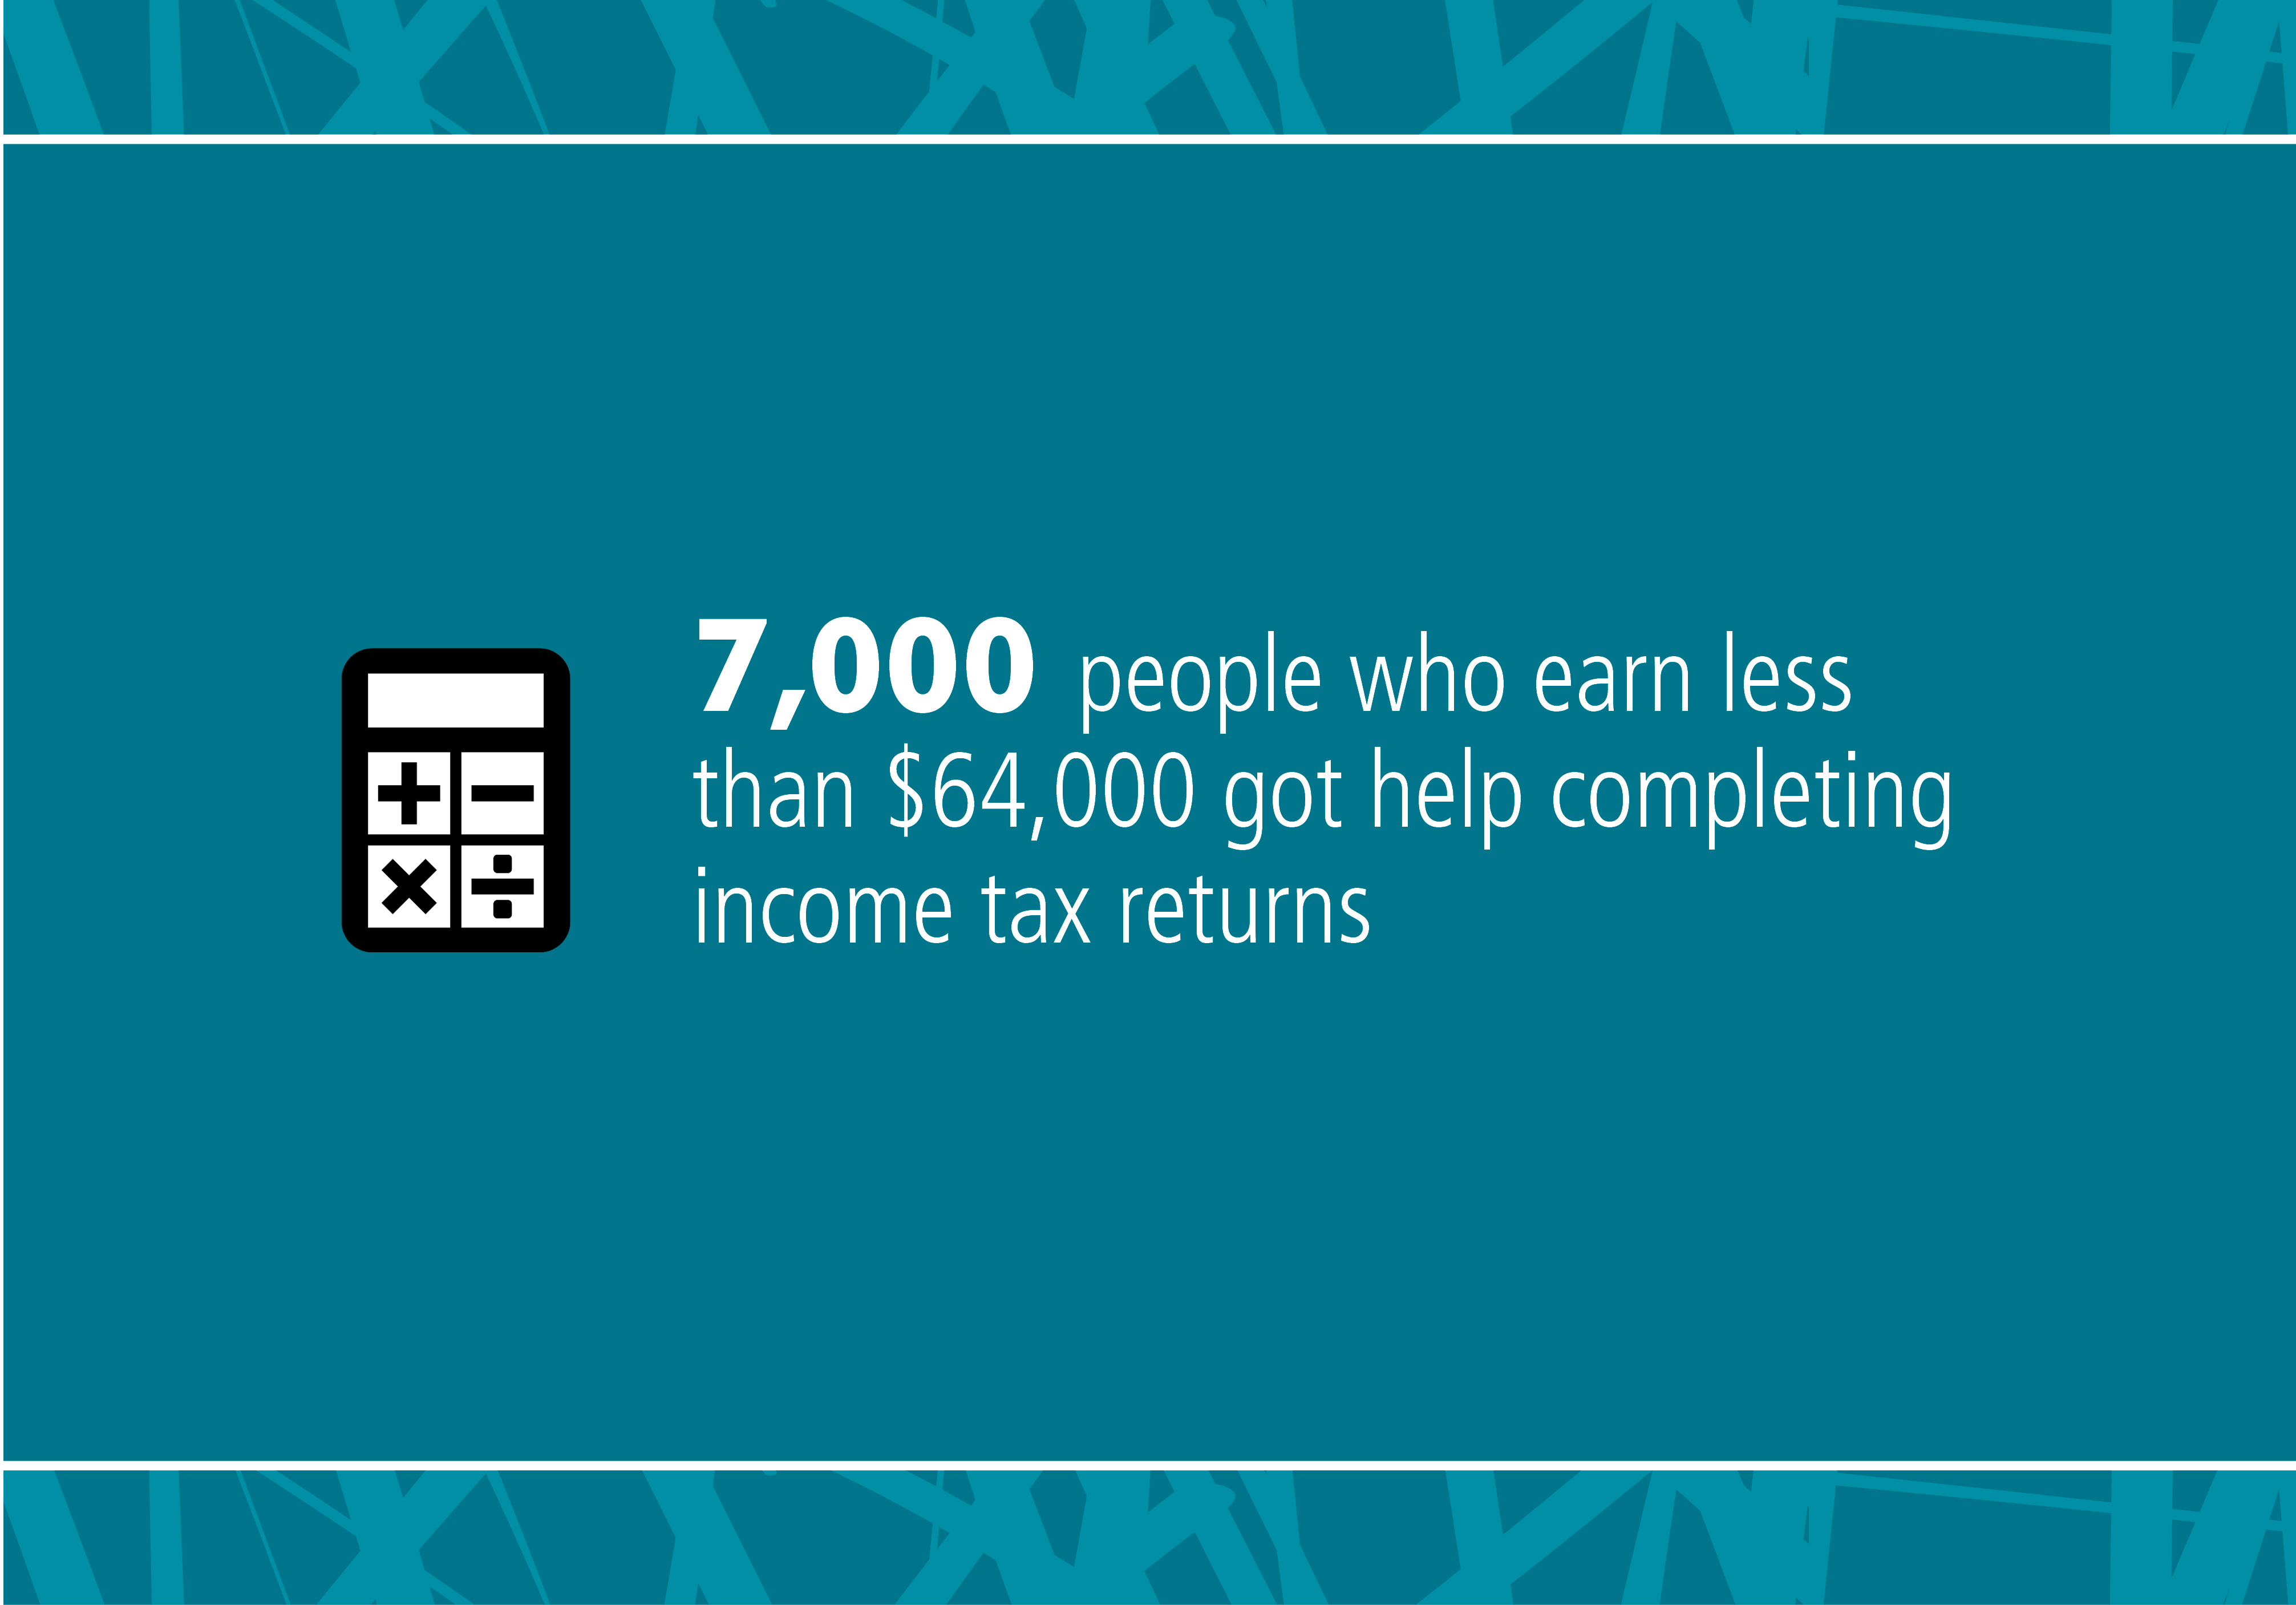 7,000 people who earn less than $66,000 got help completing income tax returns